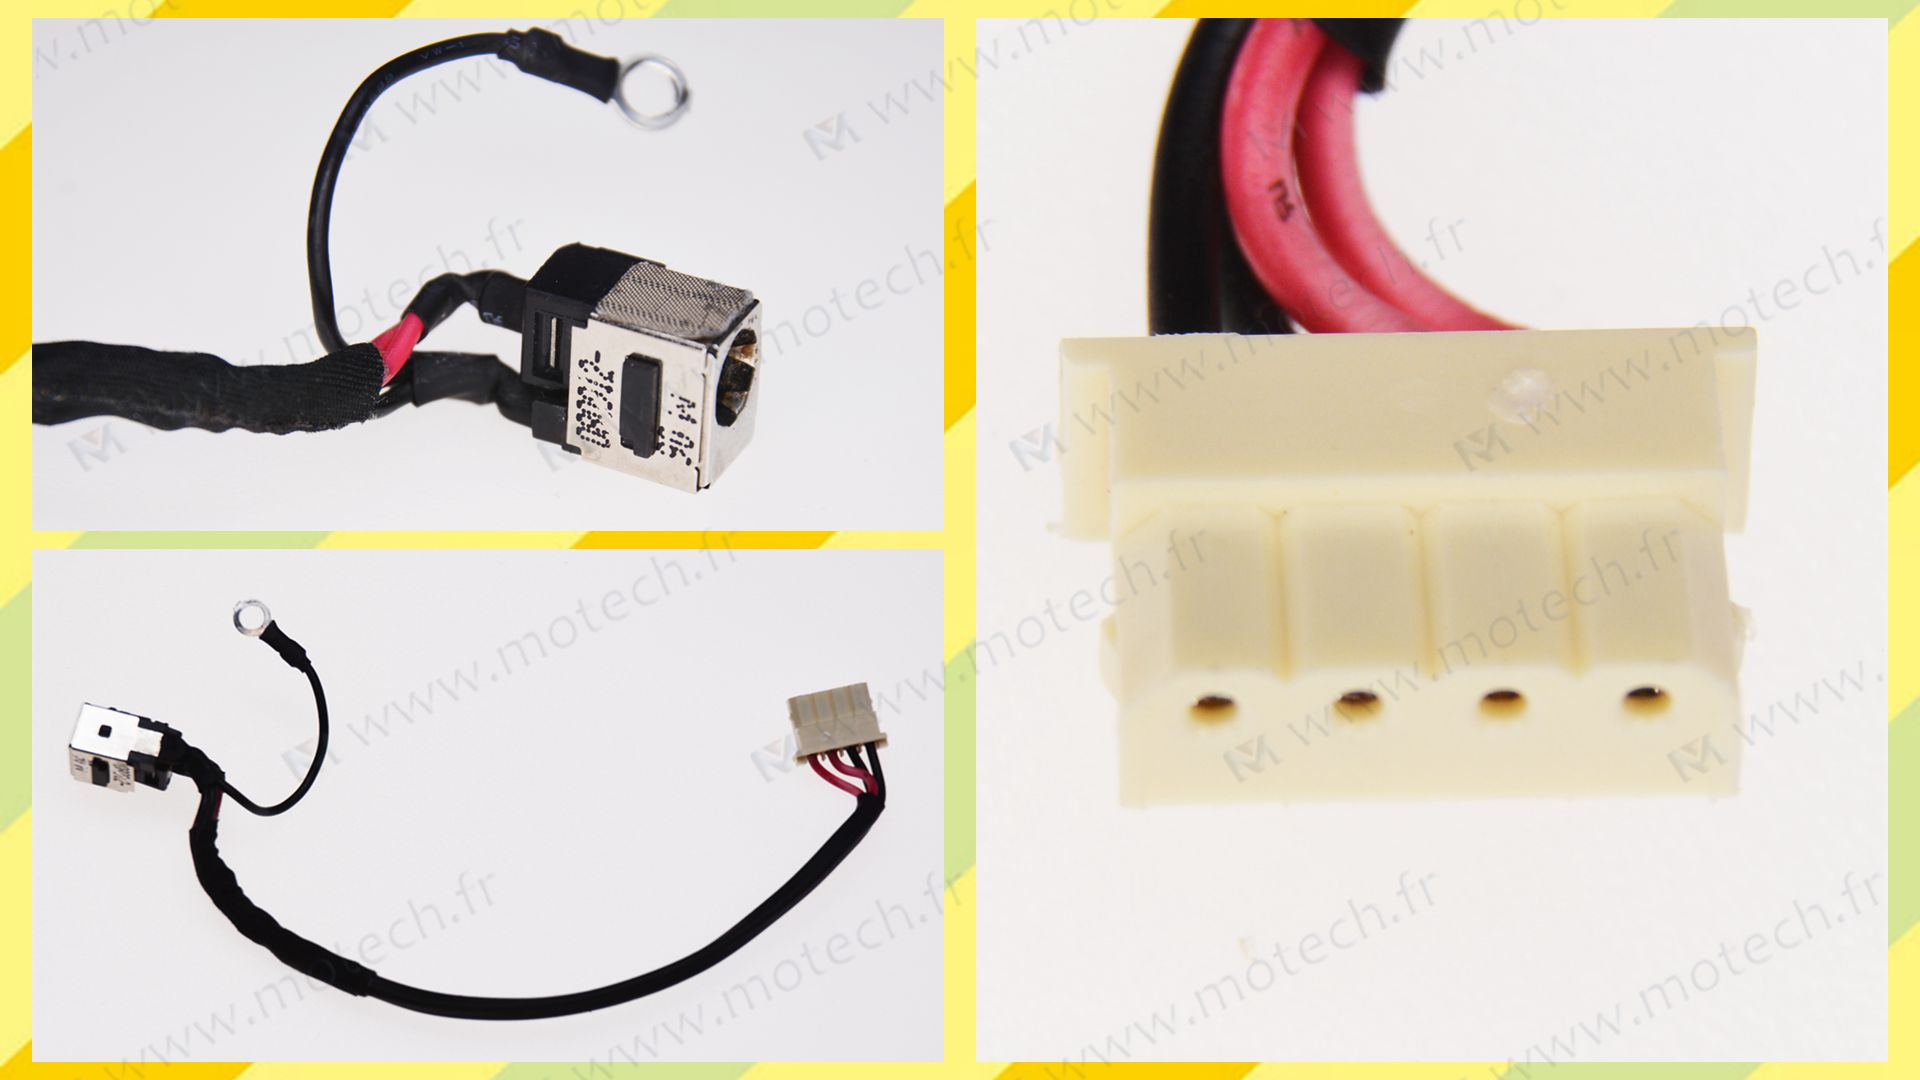 Packard Bell MH35 charging connector, Packard Bell MH35 DC Power Jack, Packard Bell MH35 DC IN Cable, Packard Bell MH35 Power Jack, Packard Bell MH35 plug, Packard Bell MH35 Jack socket, Packard Bell MH35 connecteur de charge, 